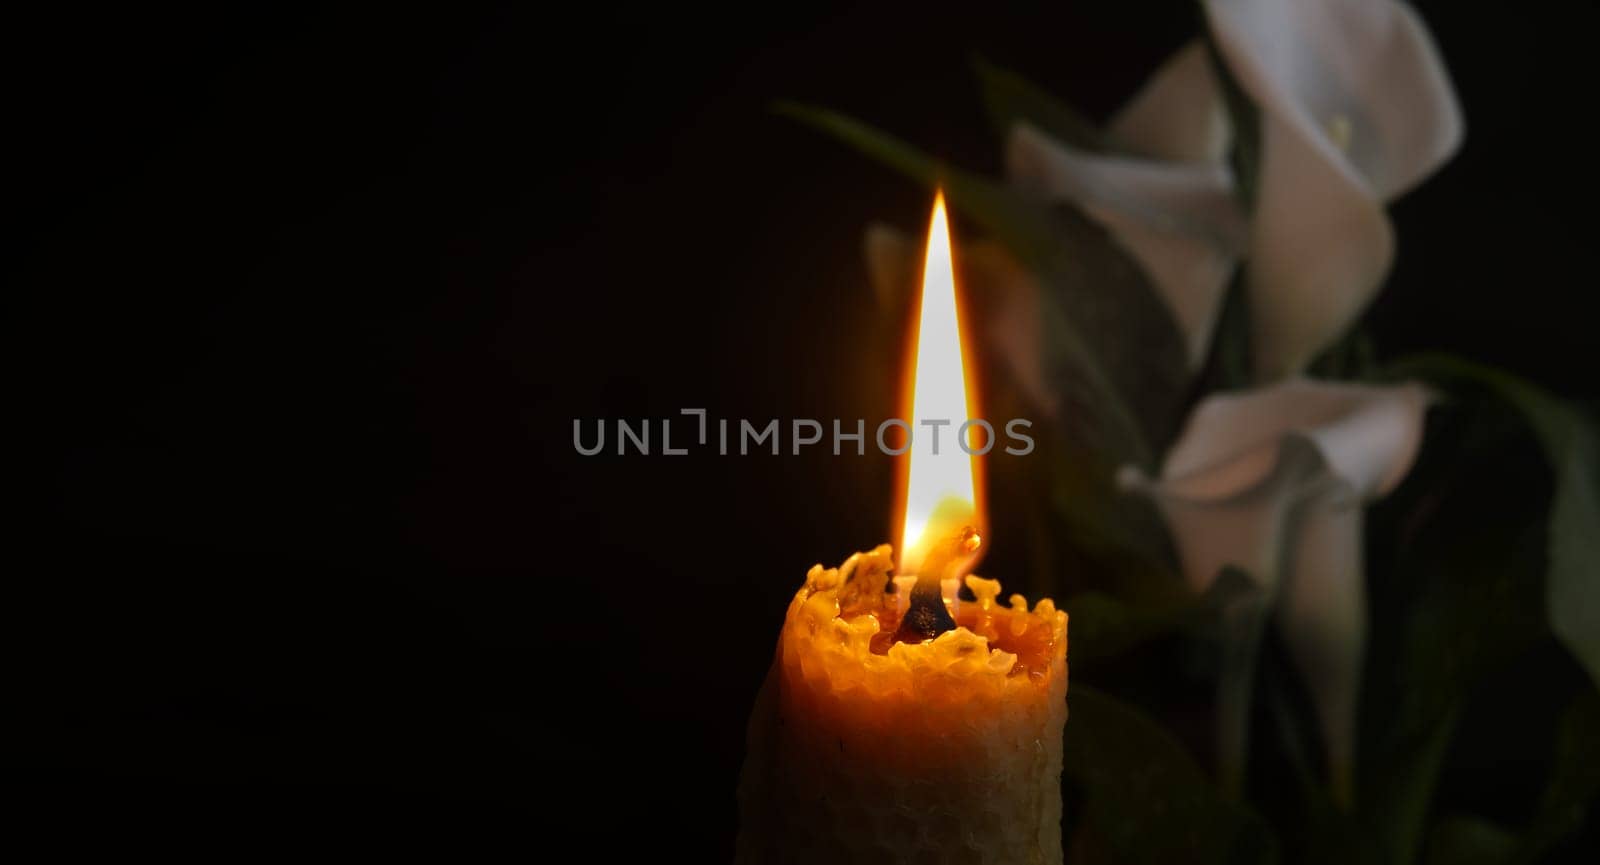 Single burning wax candle radiating a gentle flame next to white calla lily flower in a dark environment. Close-up view with free copy space